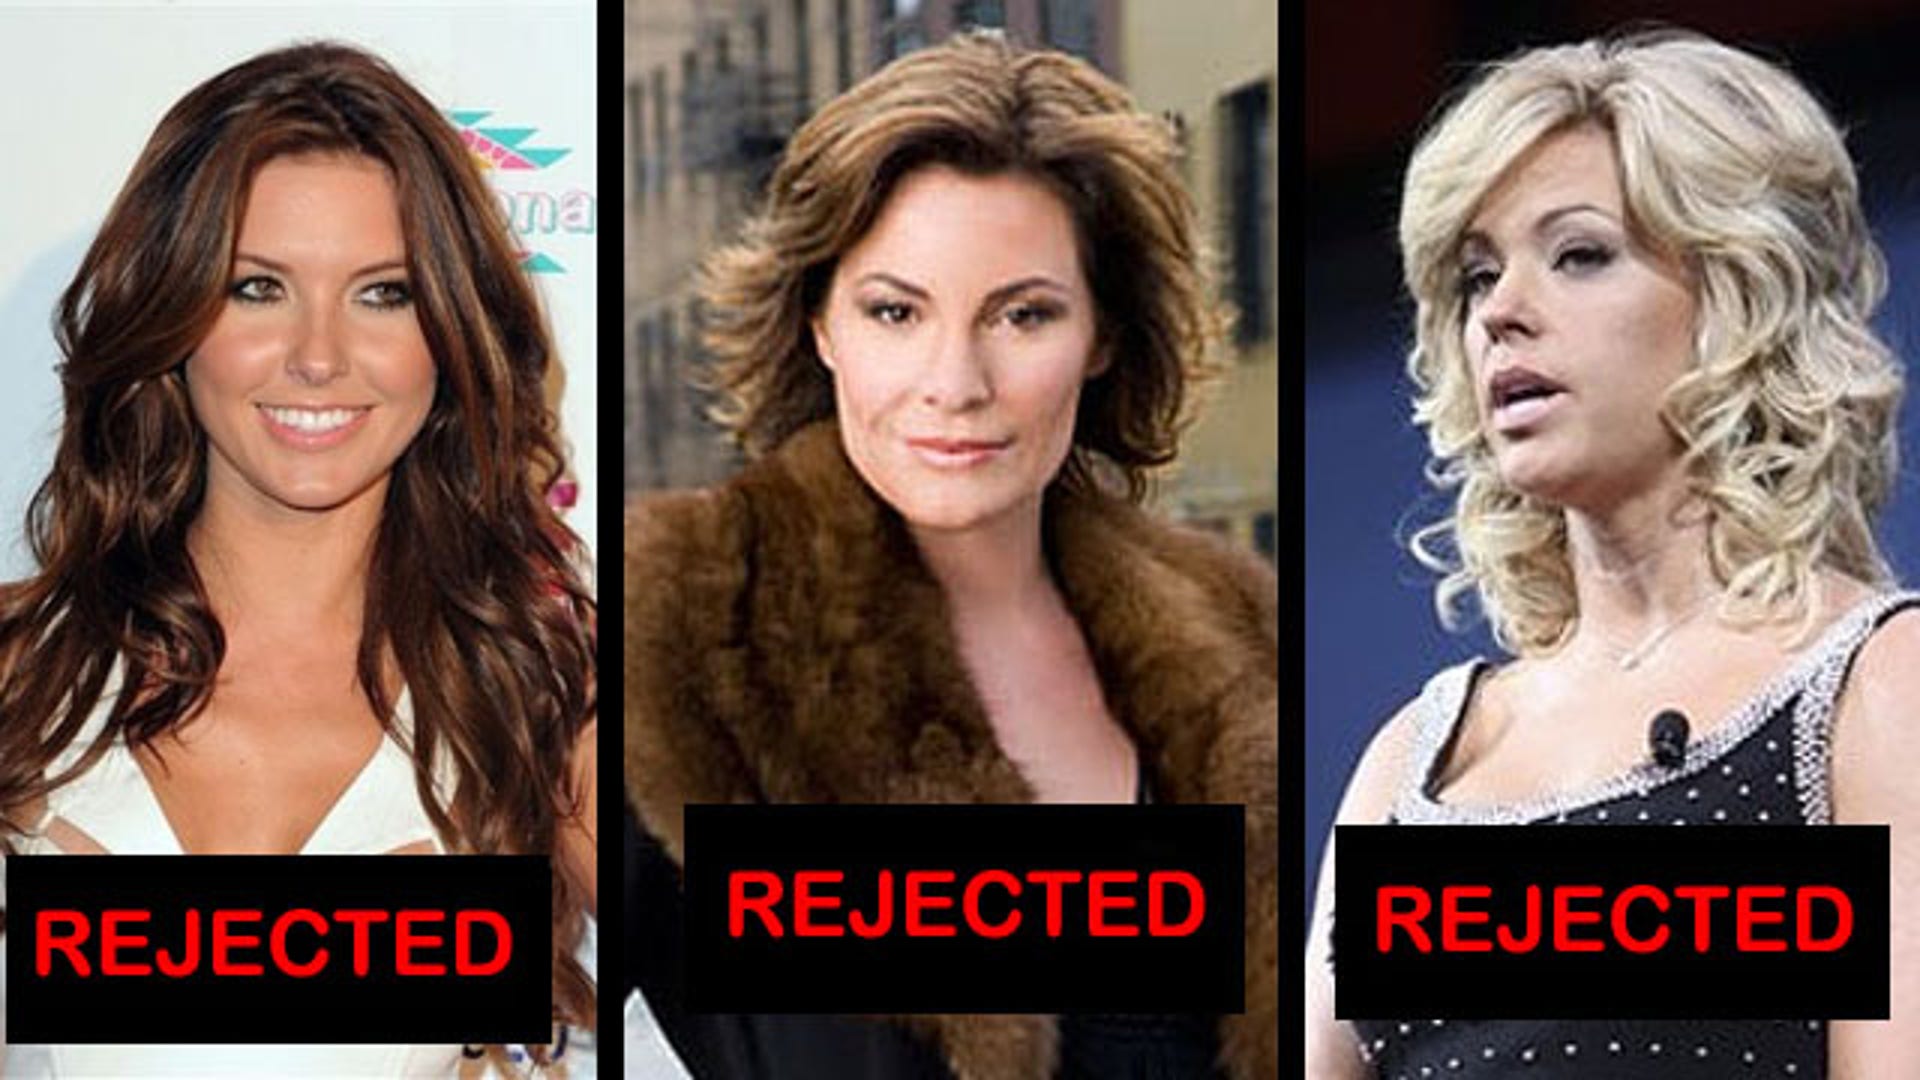 Stars rejected by Playboy Fox News image